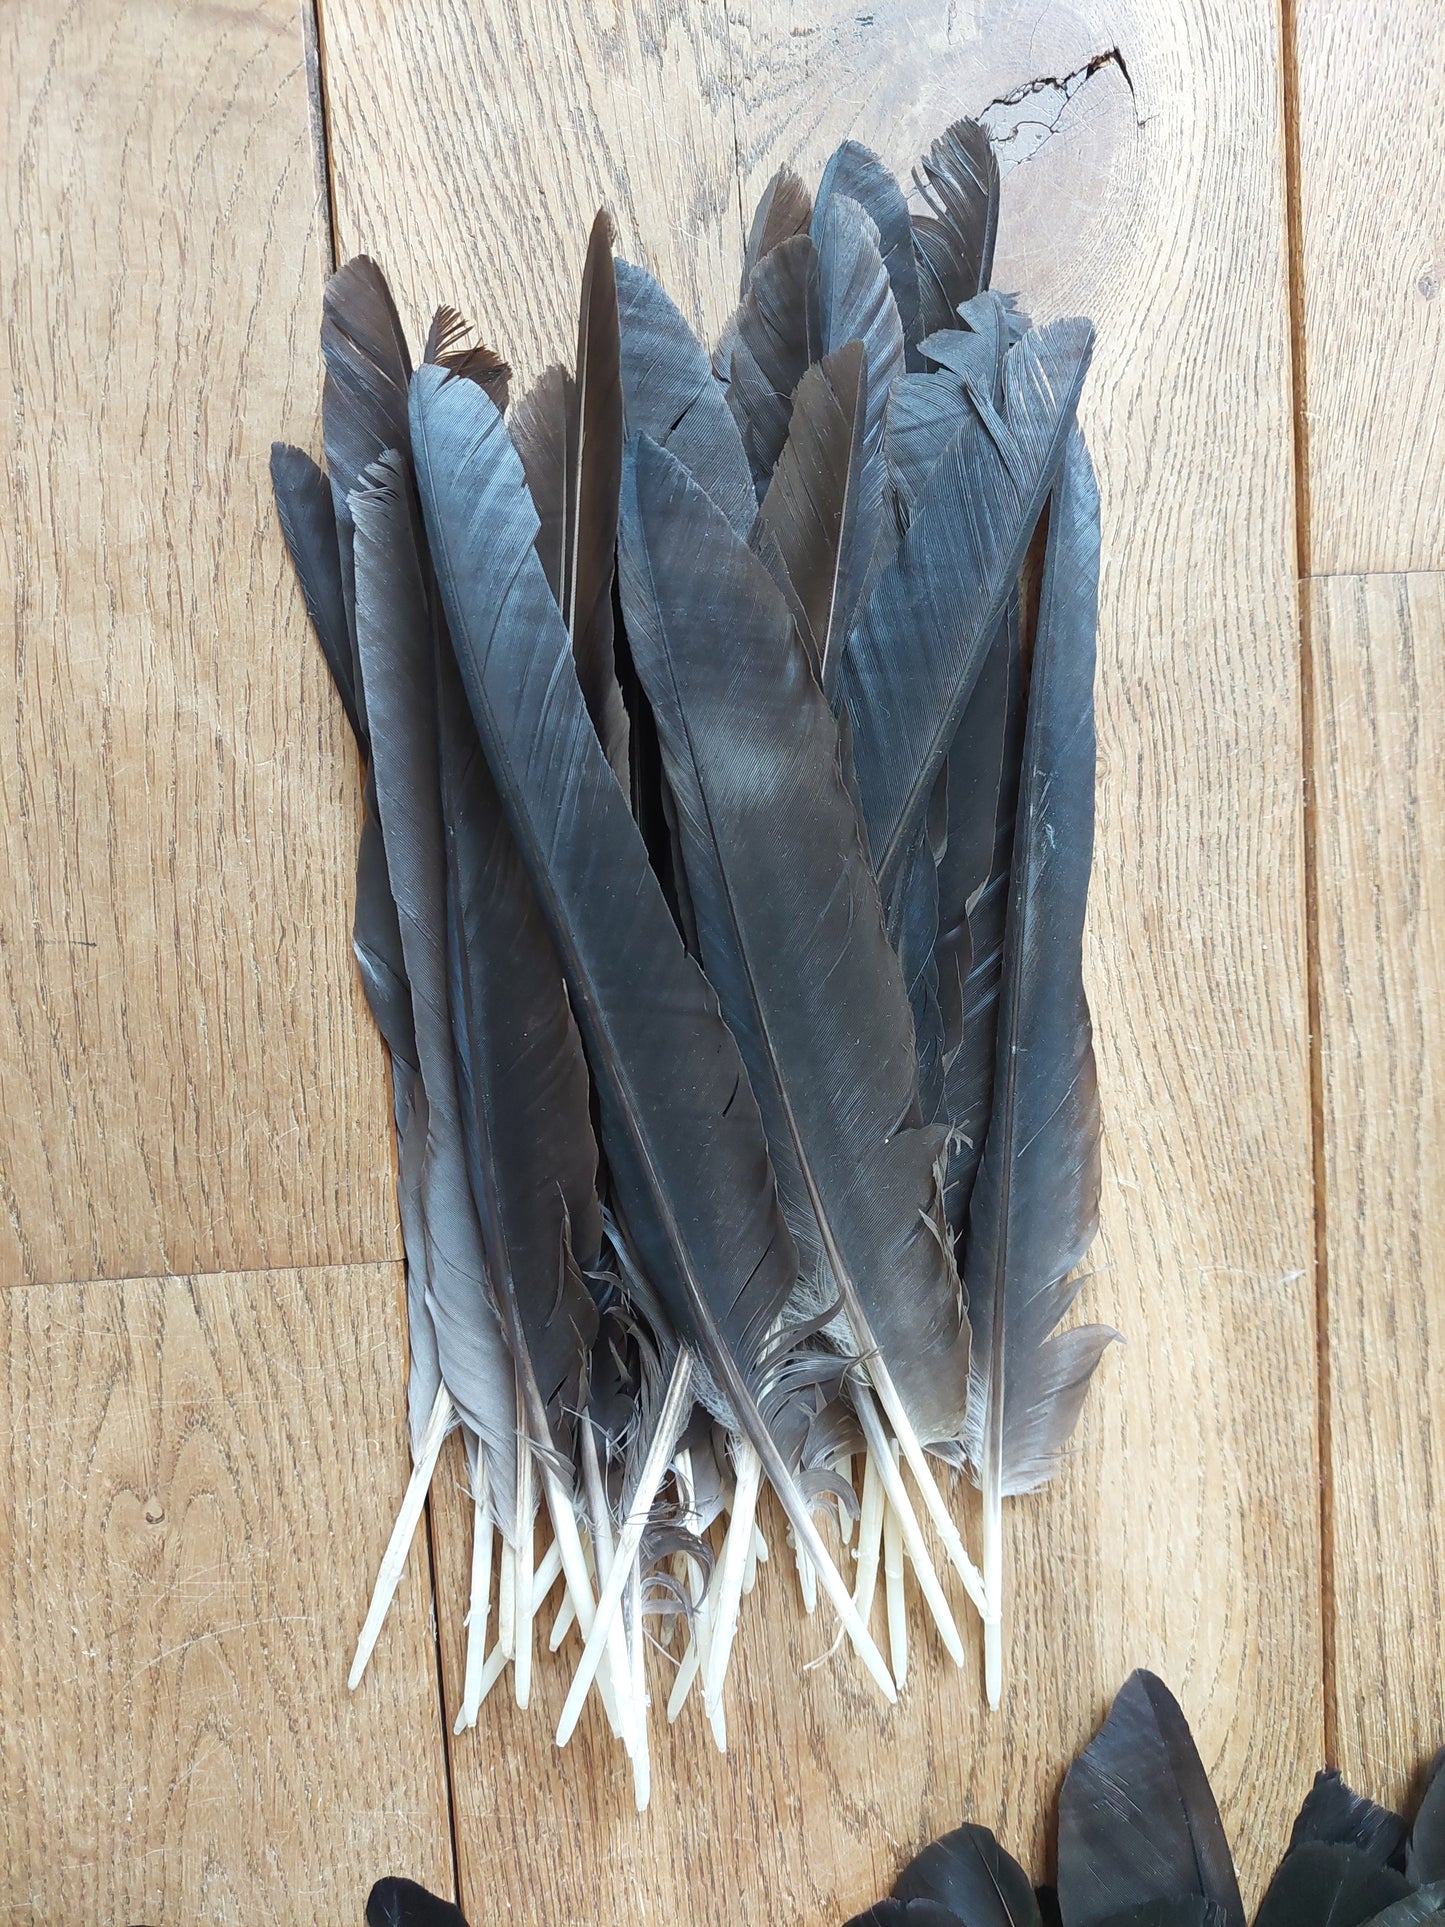 Crow feathers